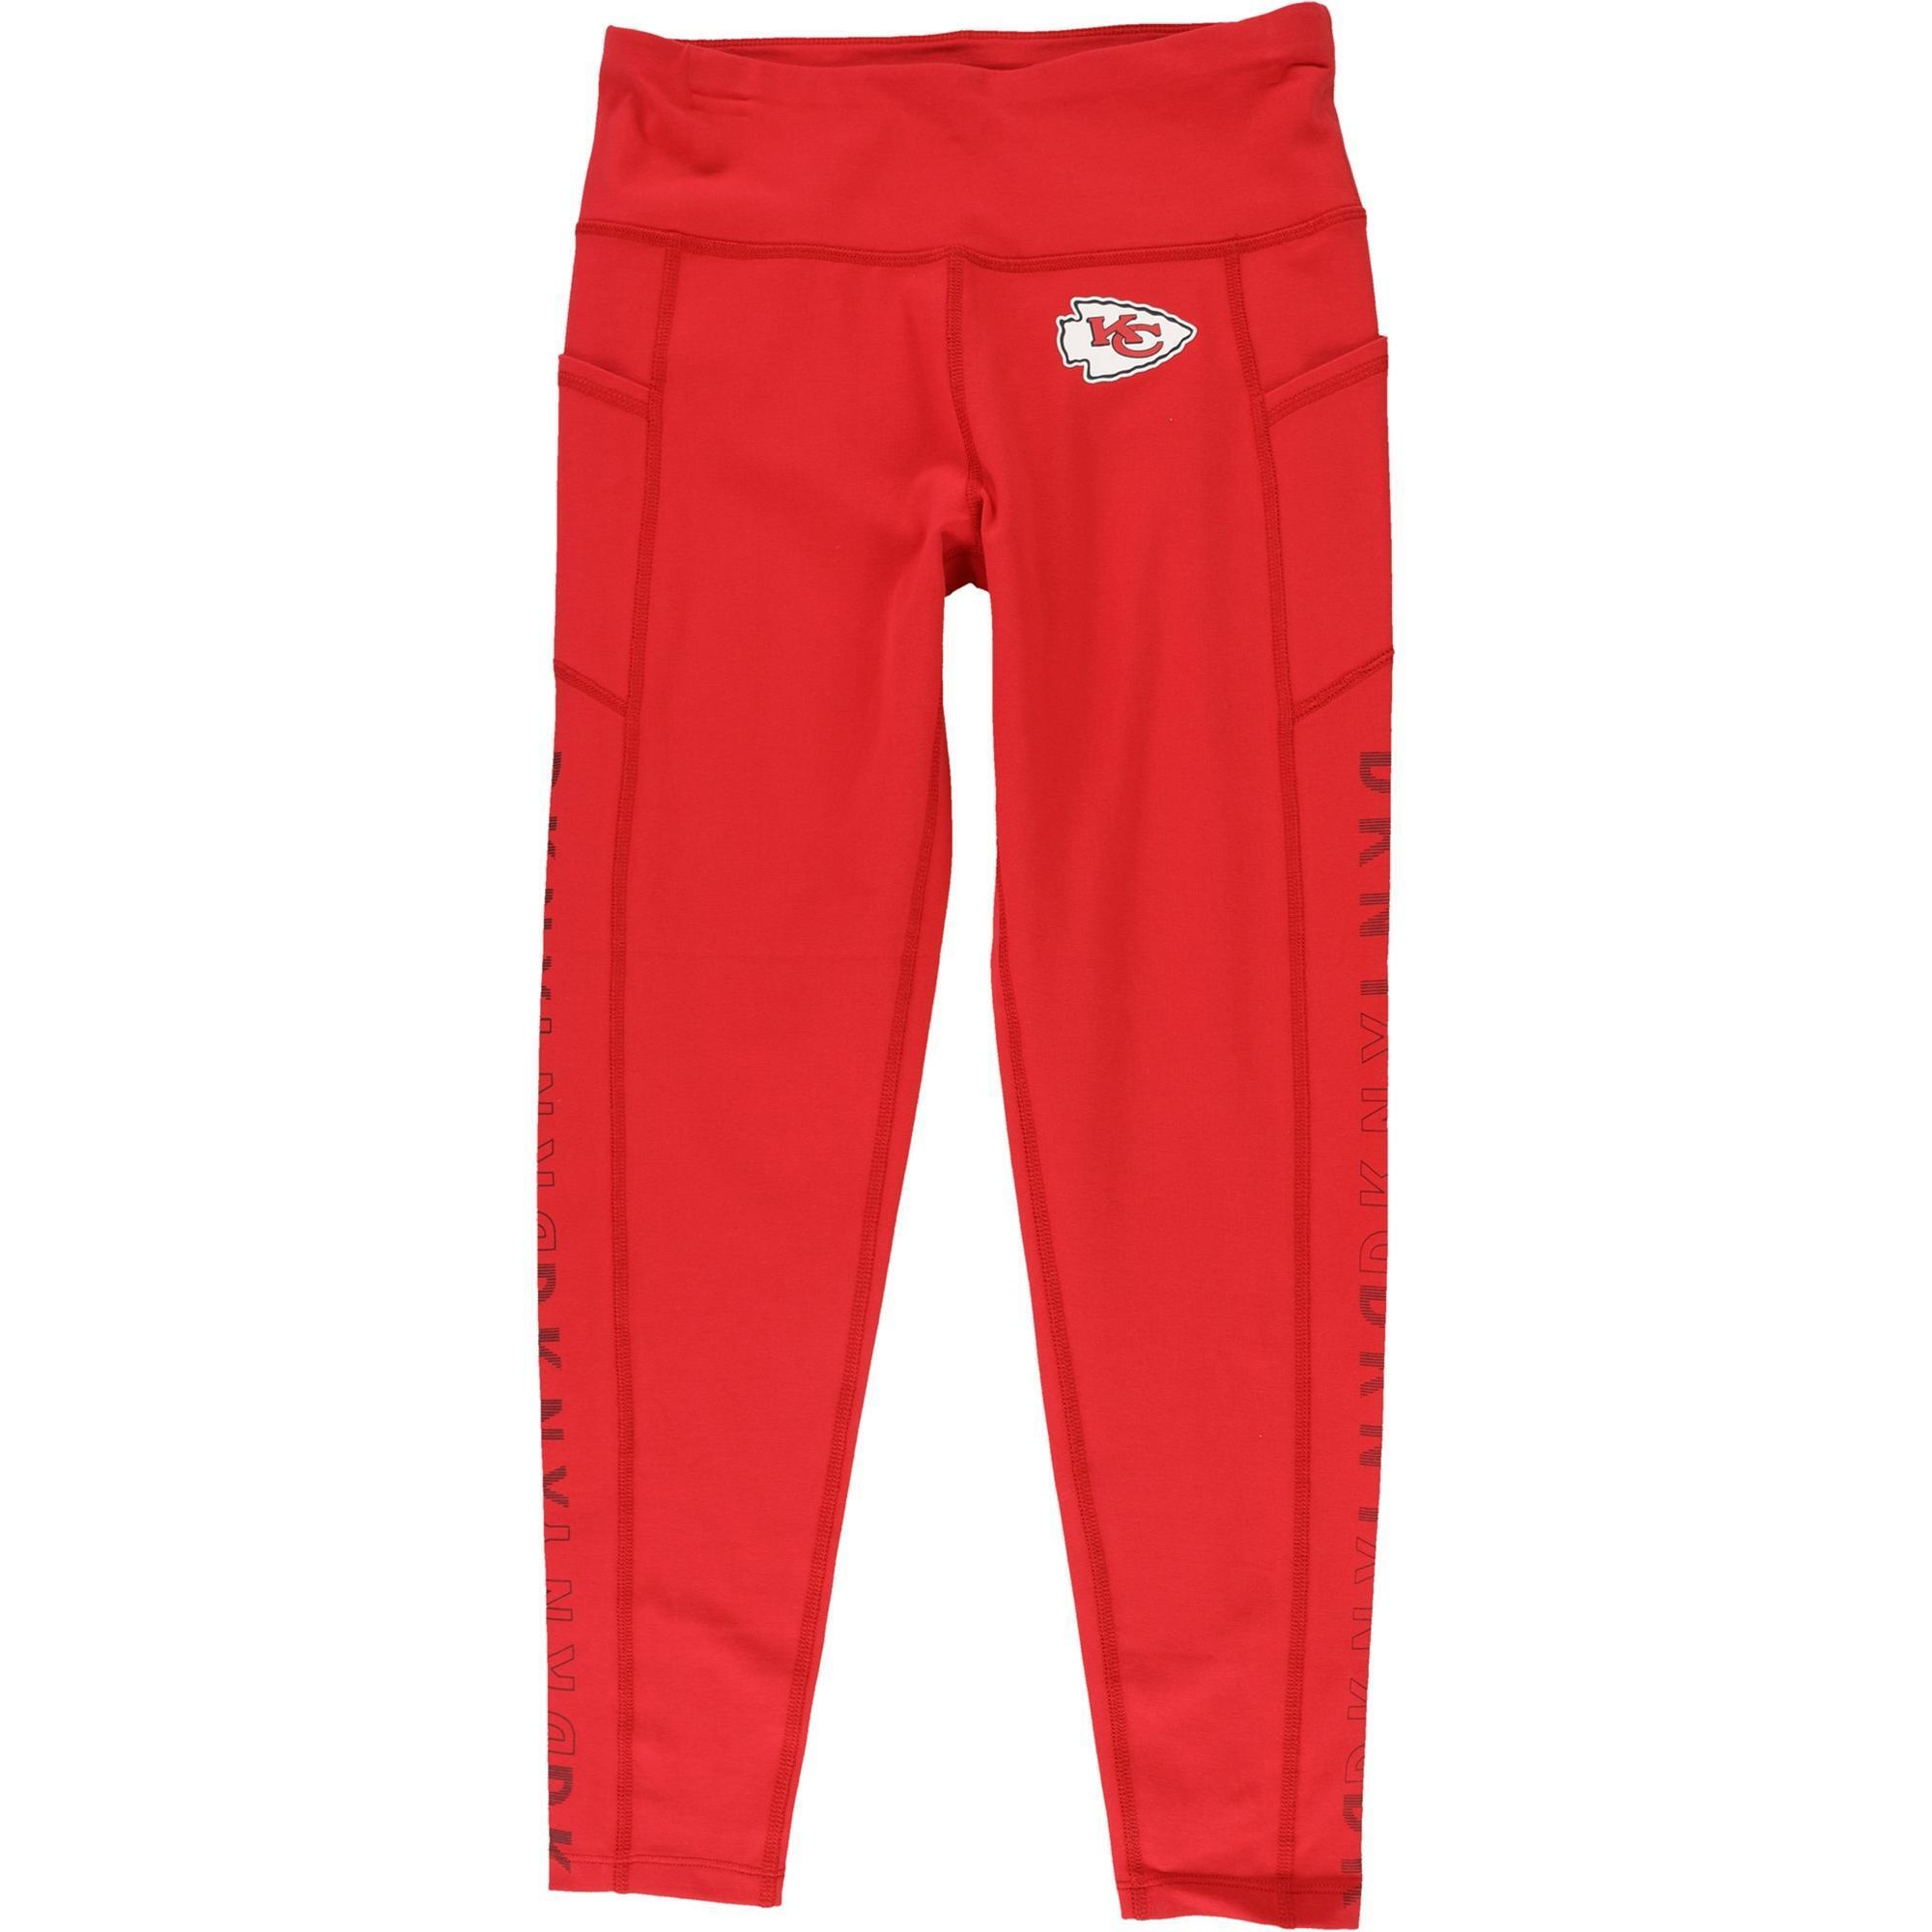 DKNY Womens Kansas City Chiefs Compression Athletic Pants, Style # DS00Z098